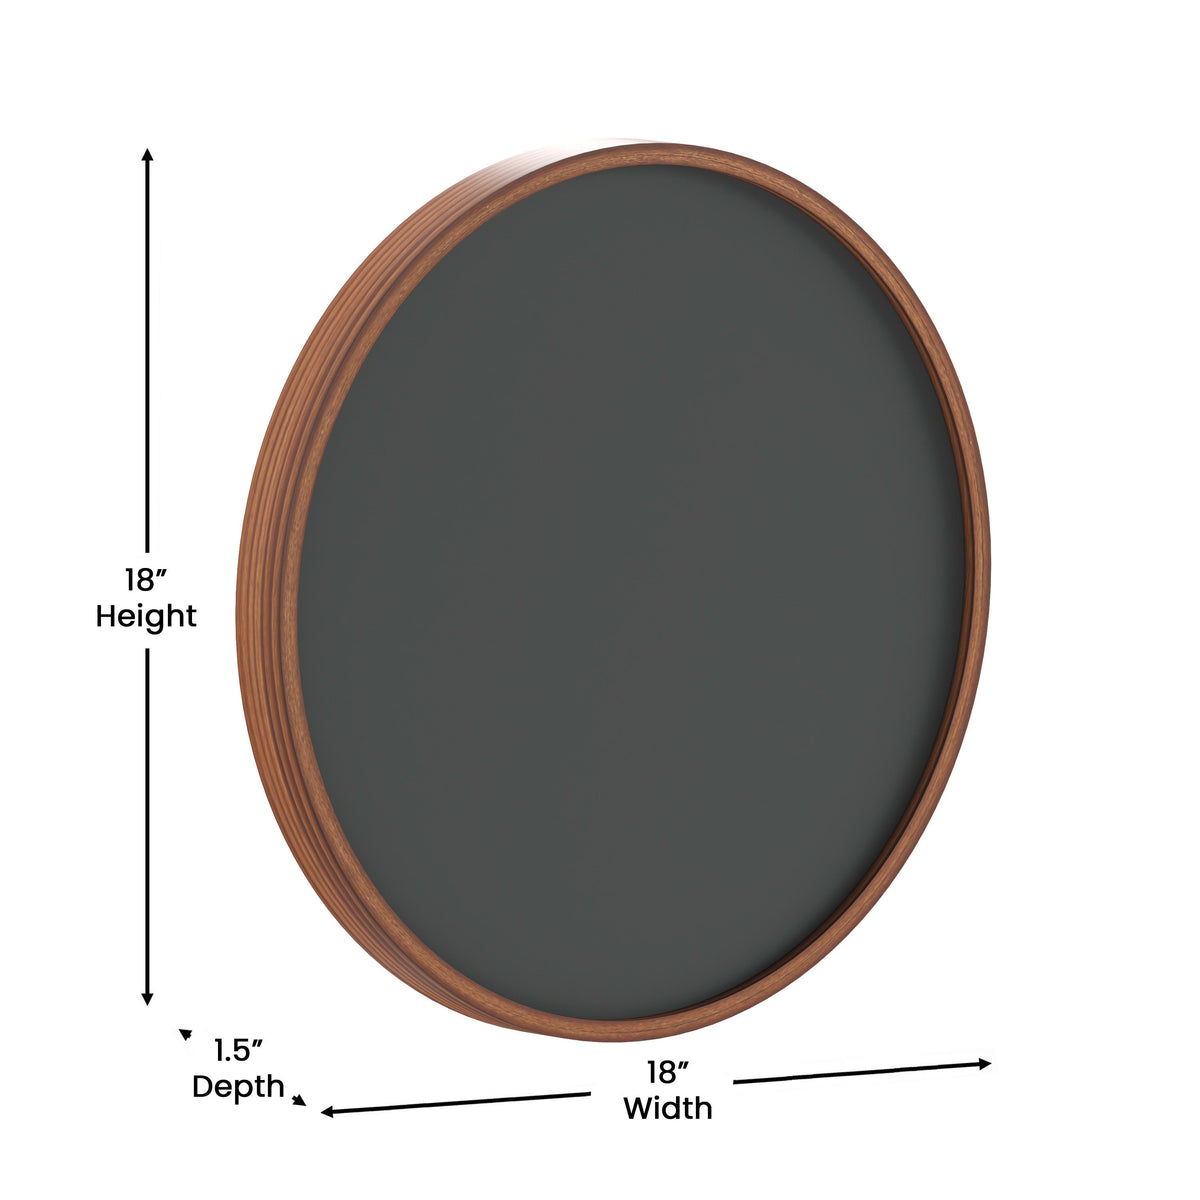 Rustic,18inch |#| Commercial Wall Mount Rustic Wooden Frame Magnetic Chalkboard - 18inch Round